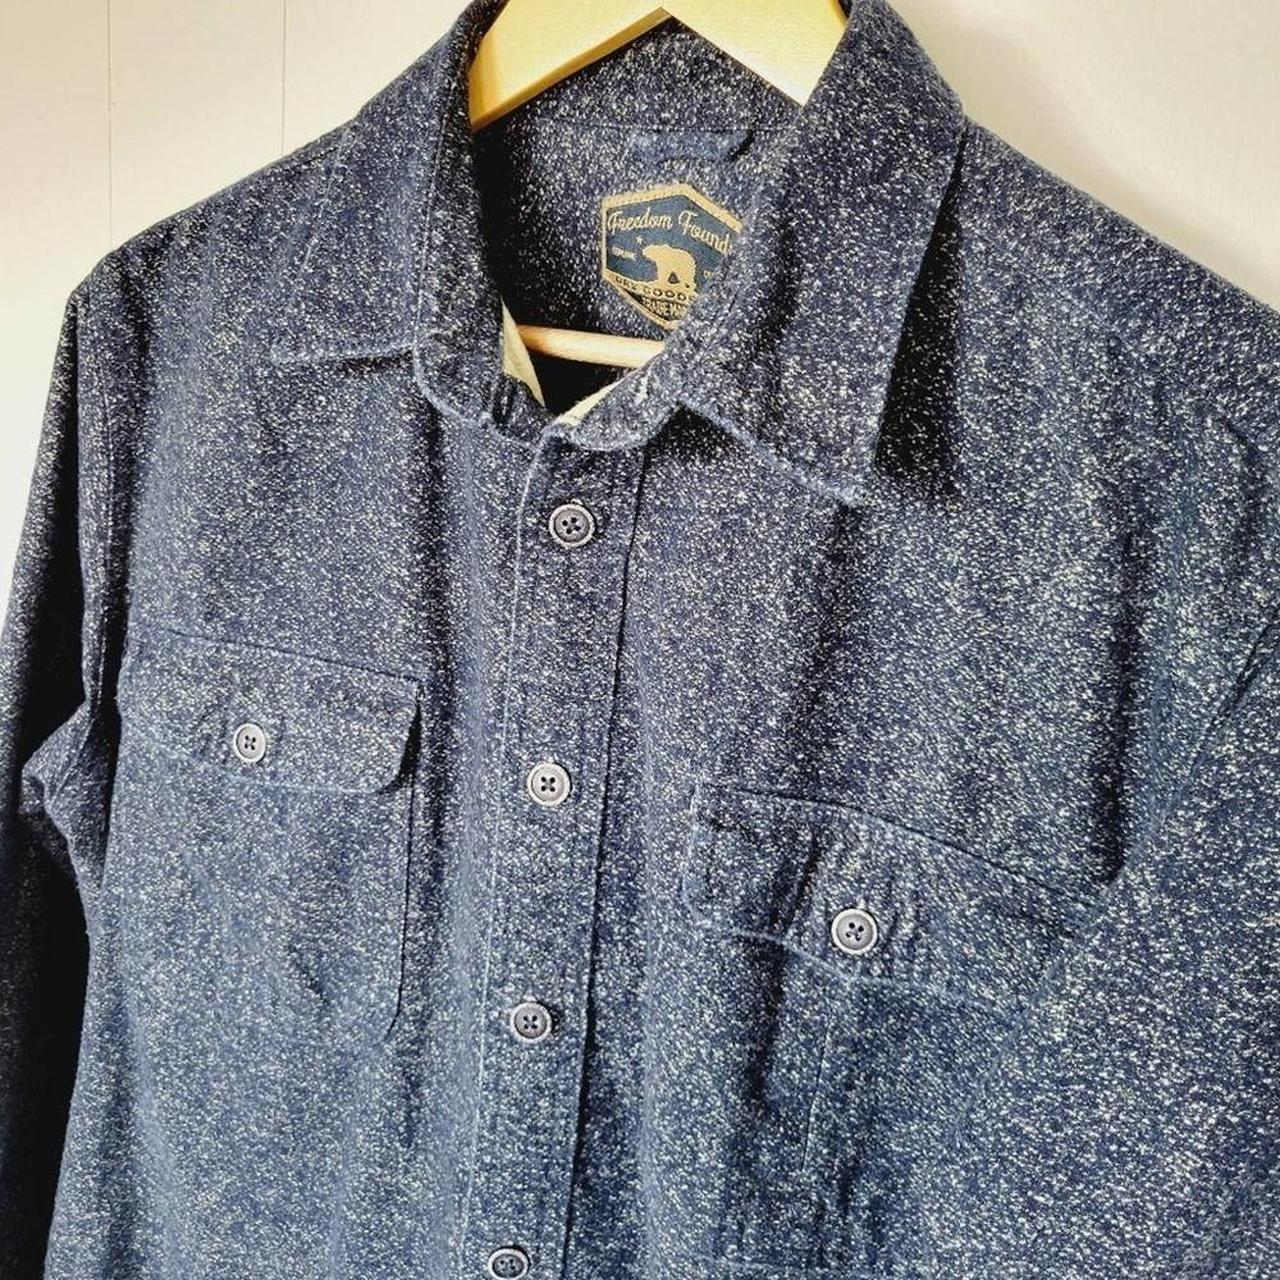 Freedom Foundry Speckled Navy Blue Button Up Flannel... - Depop